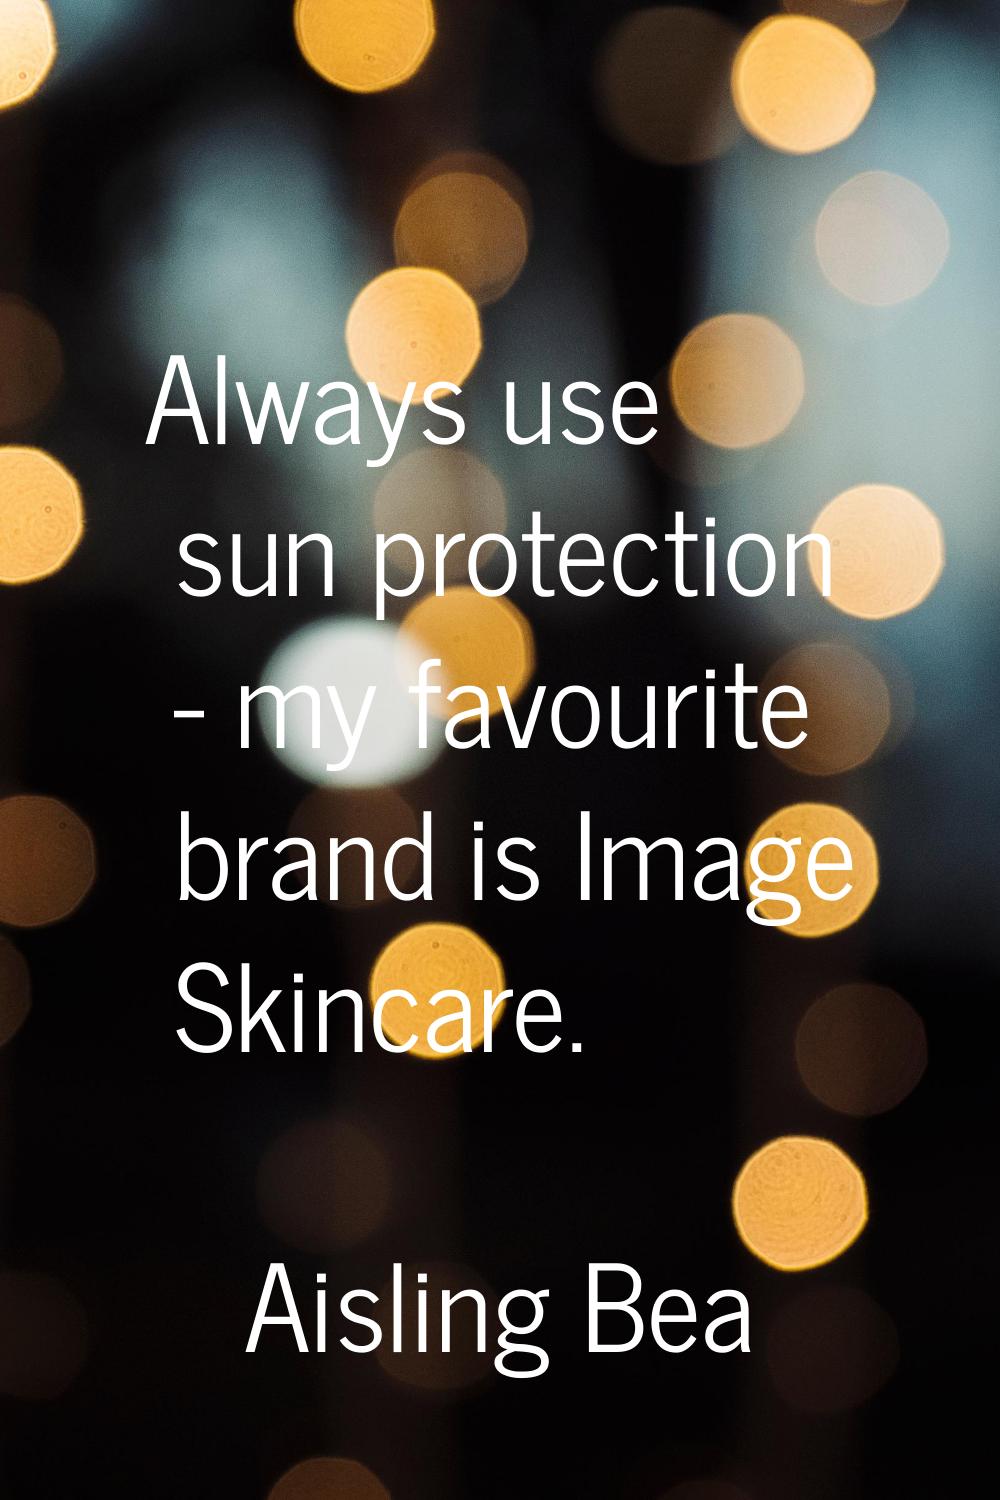 Always use sun protection - my favourite brand is Image Skincare.